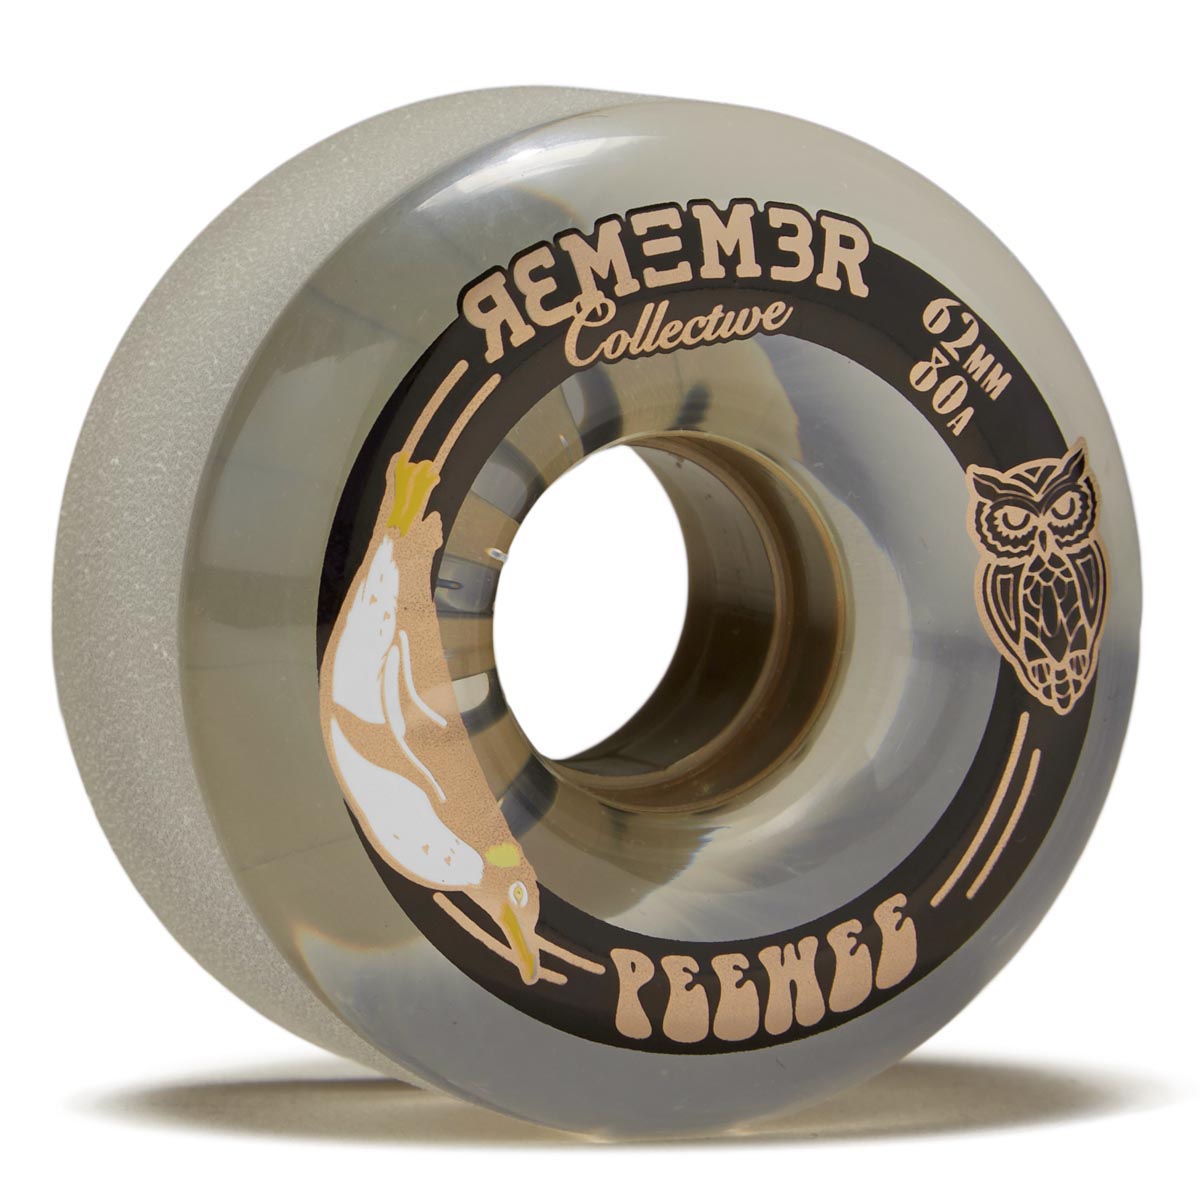 Remember Peewee 80a Longboard Wheels - Translucent - 62mm image 1